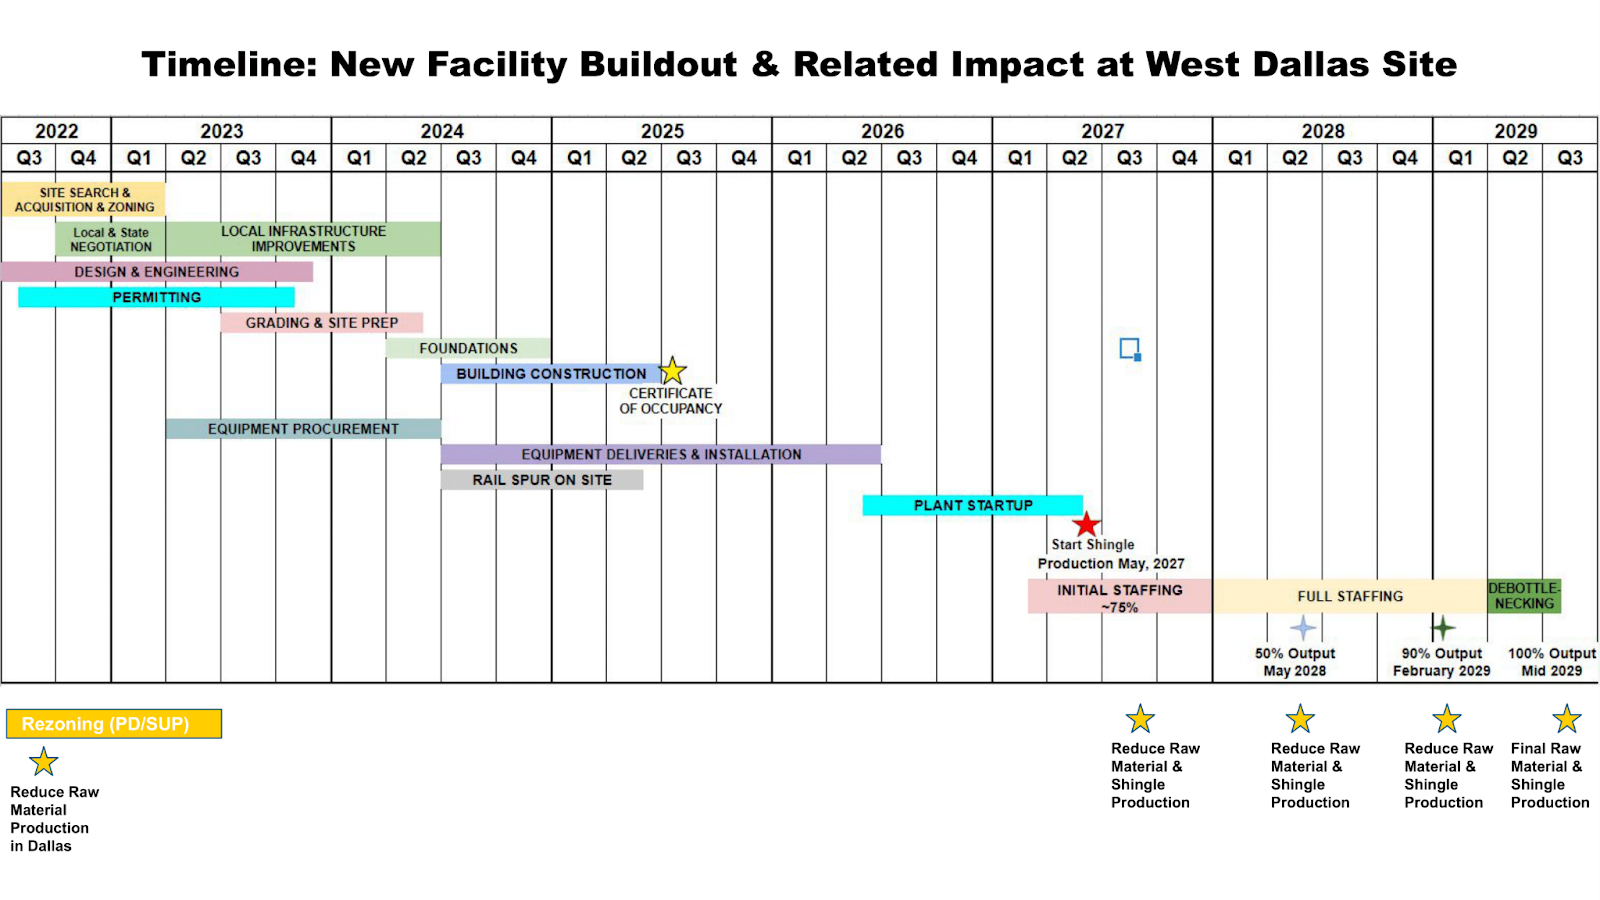 Timeline of new facility buildout and related impact at West Dallas site.